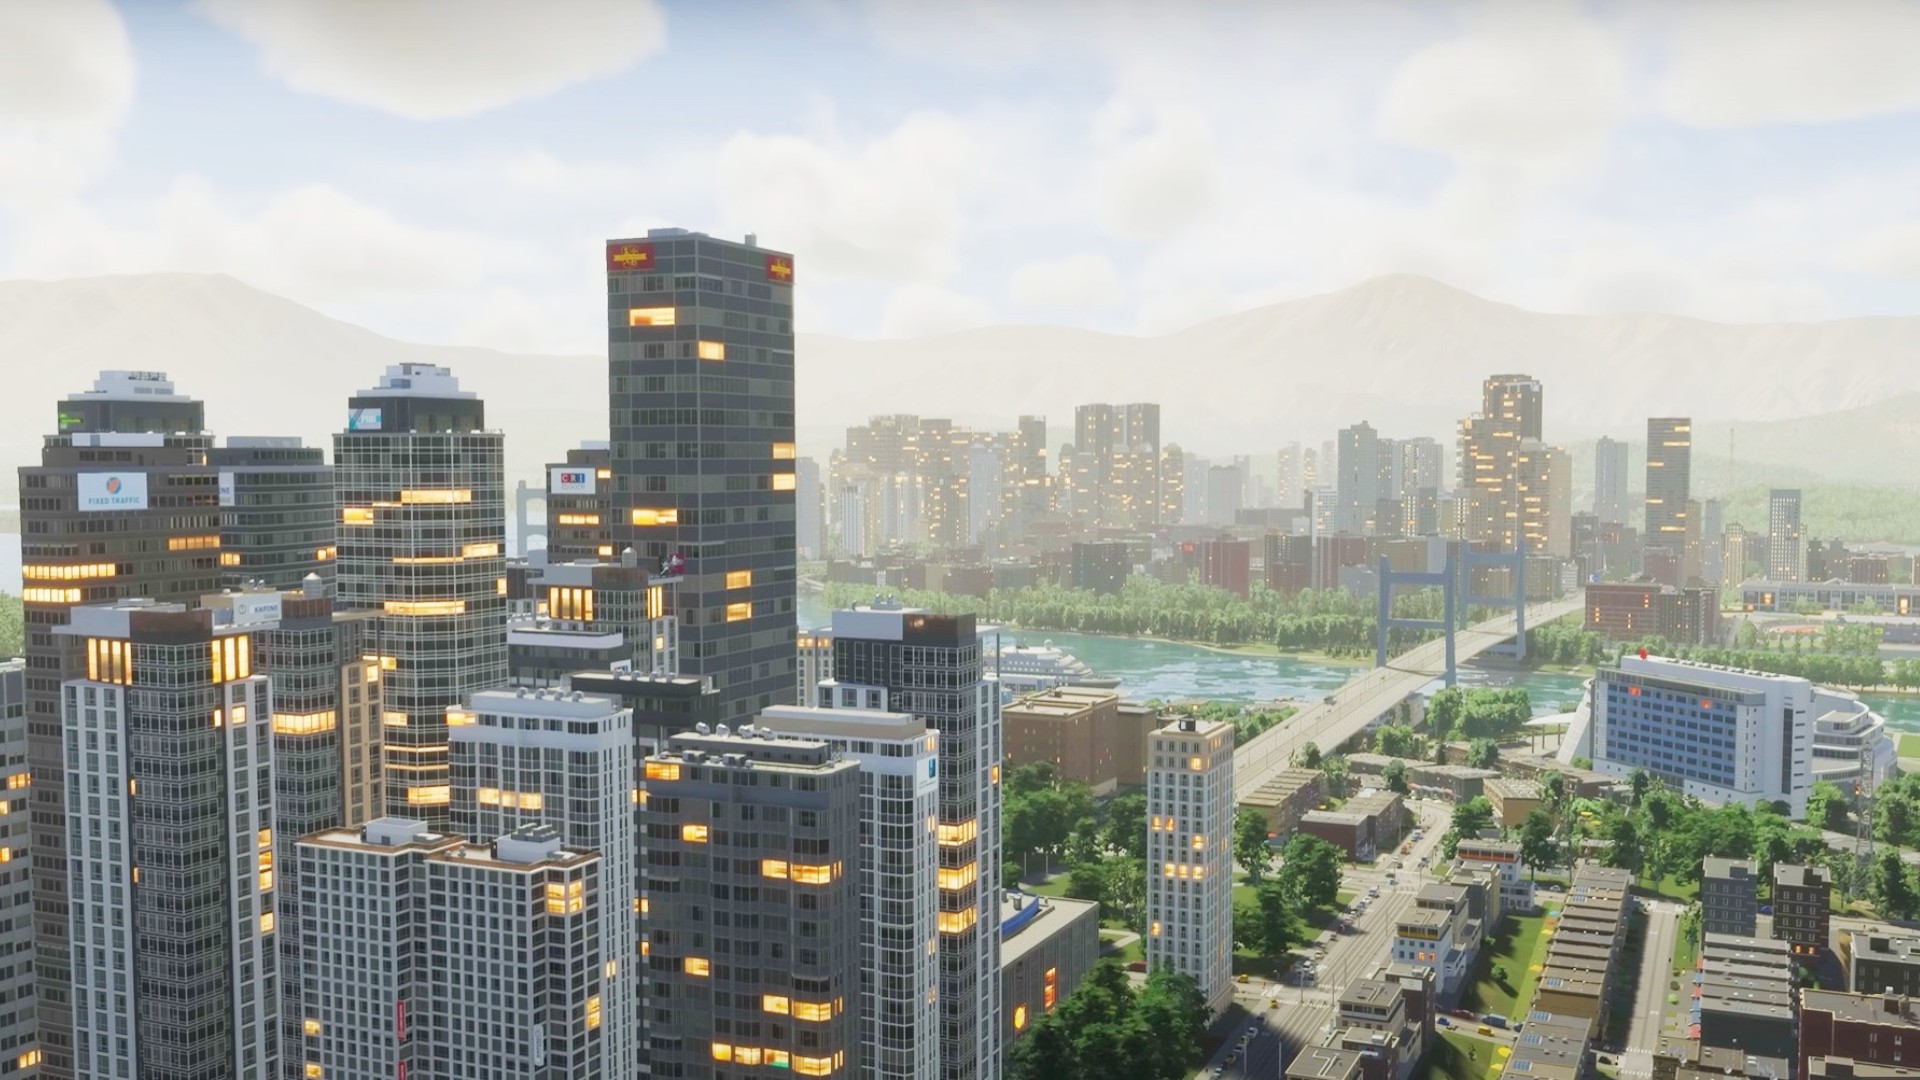 Cities: Skylines 2 is bigger and better in the best ways - Polygon